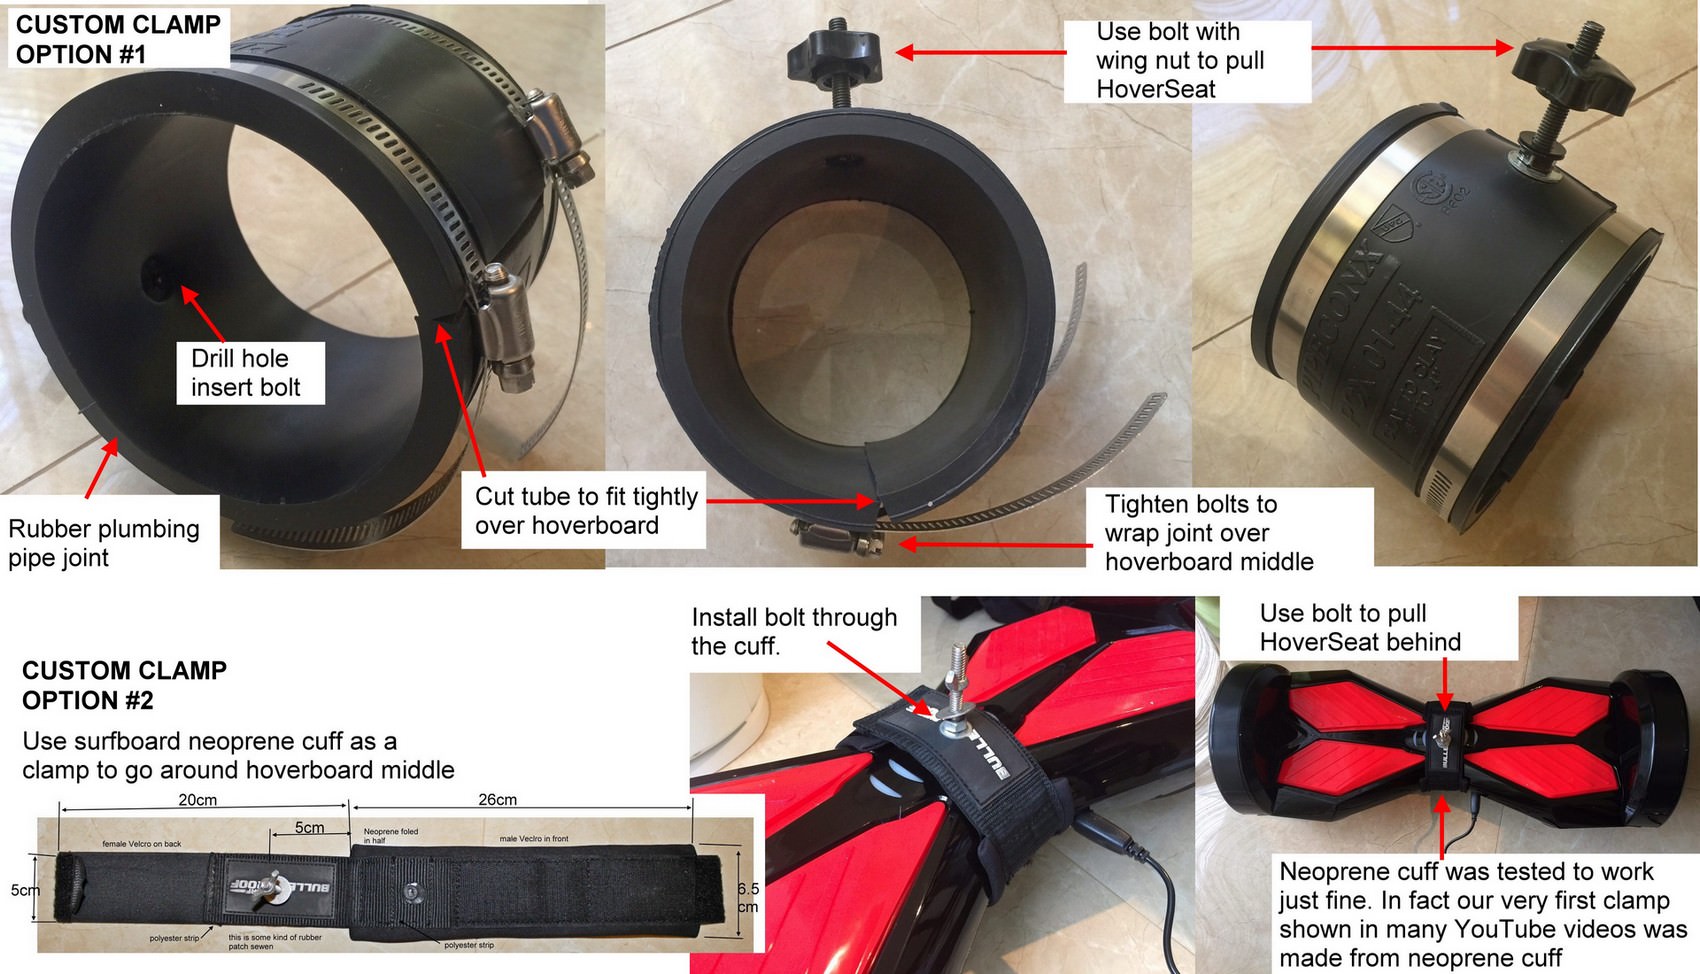 DIY clamps for hoverboards with non-round middle part